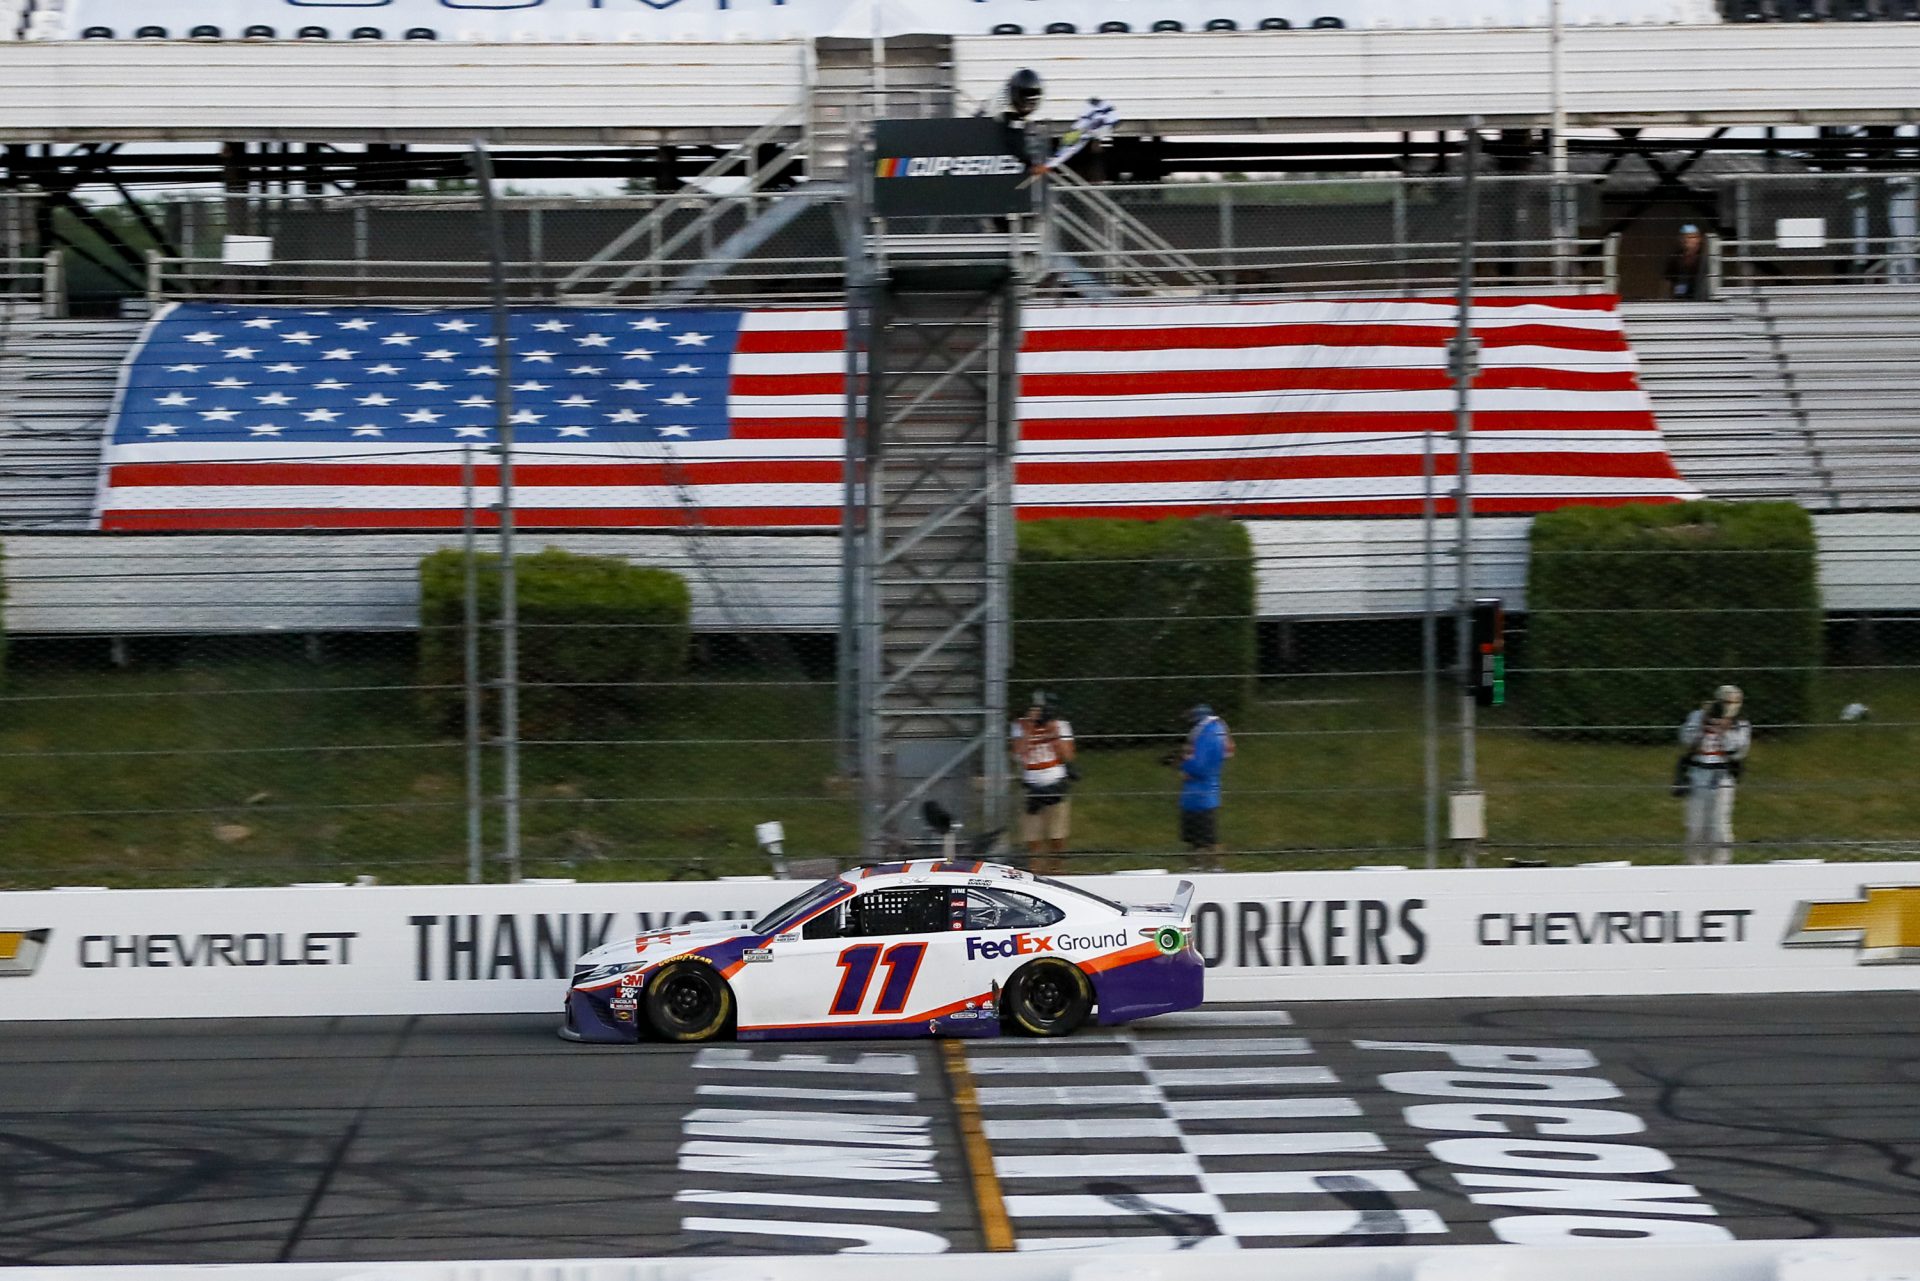 Denny Hamlin gets the checkered flag as he crosses the finish line to win the NASCAR Cup Series auto race at Pocono Raceway, Sunday, June 28, 2020, in Long Pond